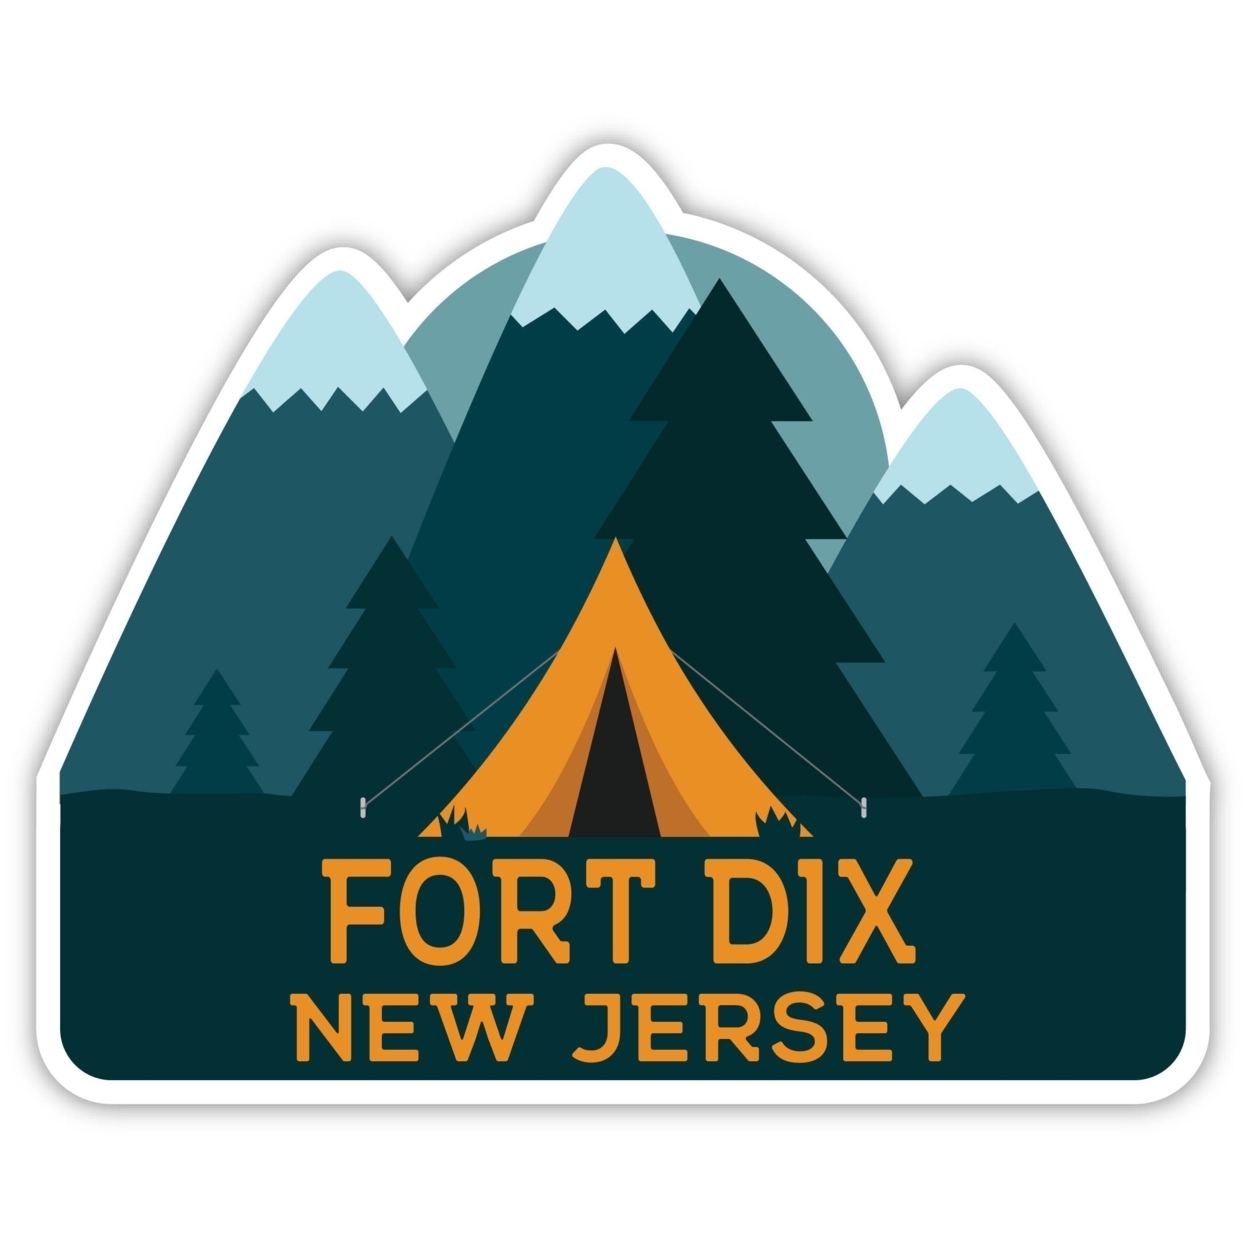 Fort Dix New Jersey Souvenir Decorative Stickers (Choose Theme And Size) - 4-Pack, 4-Inch, Tent